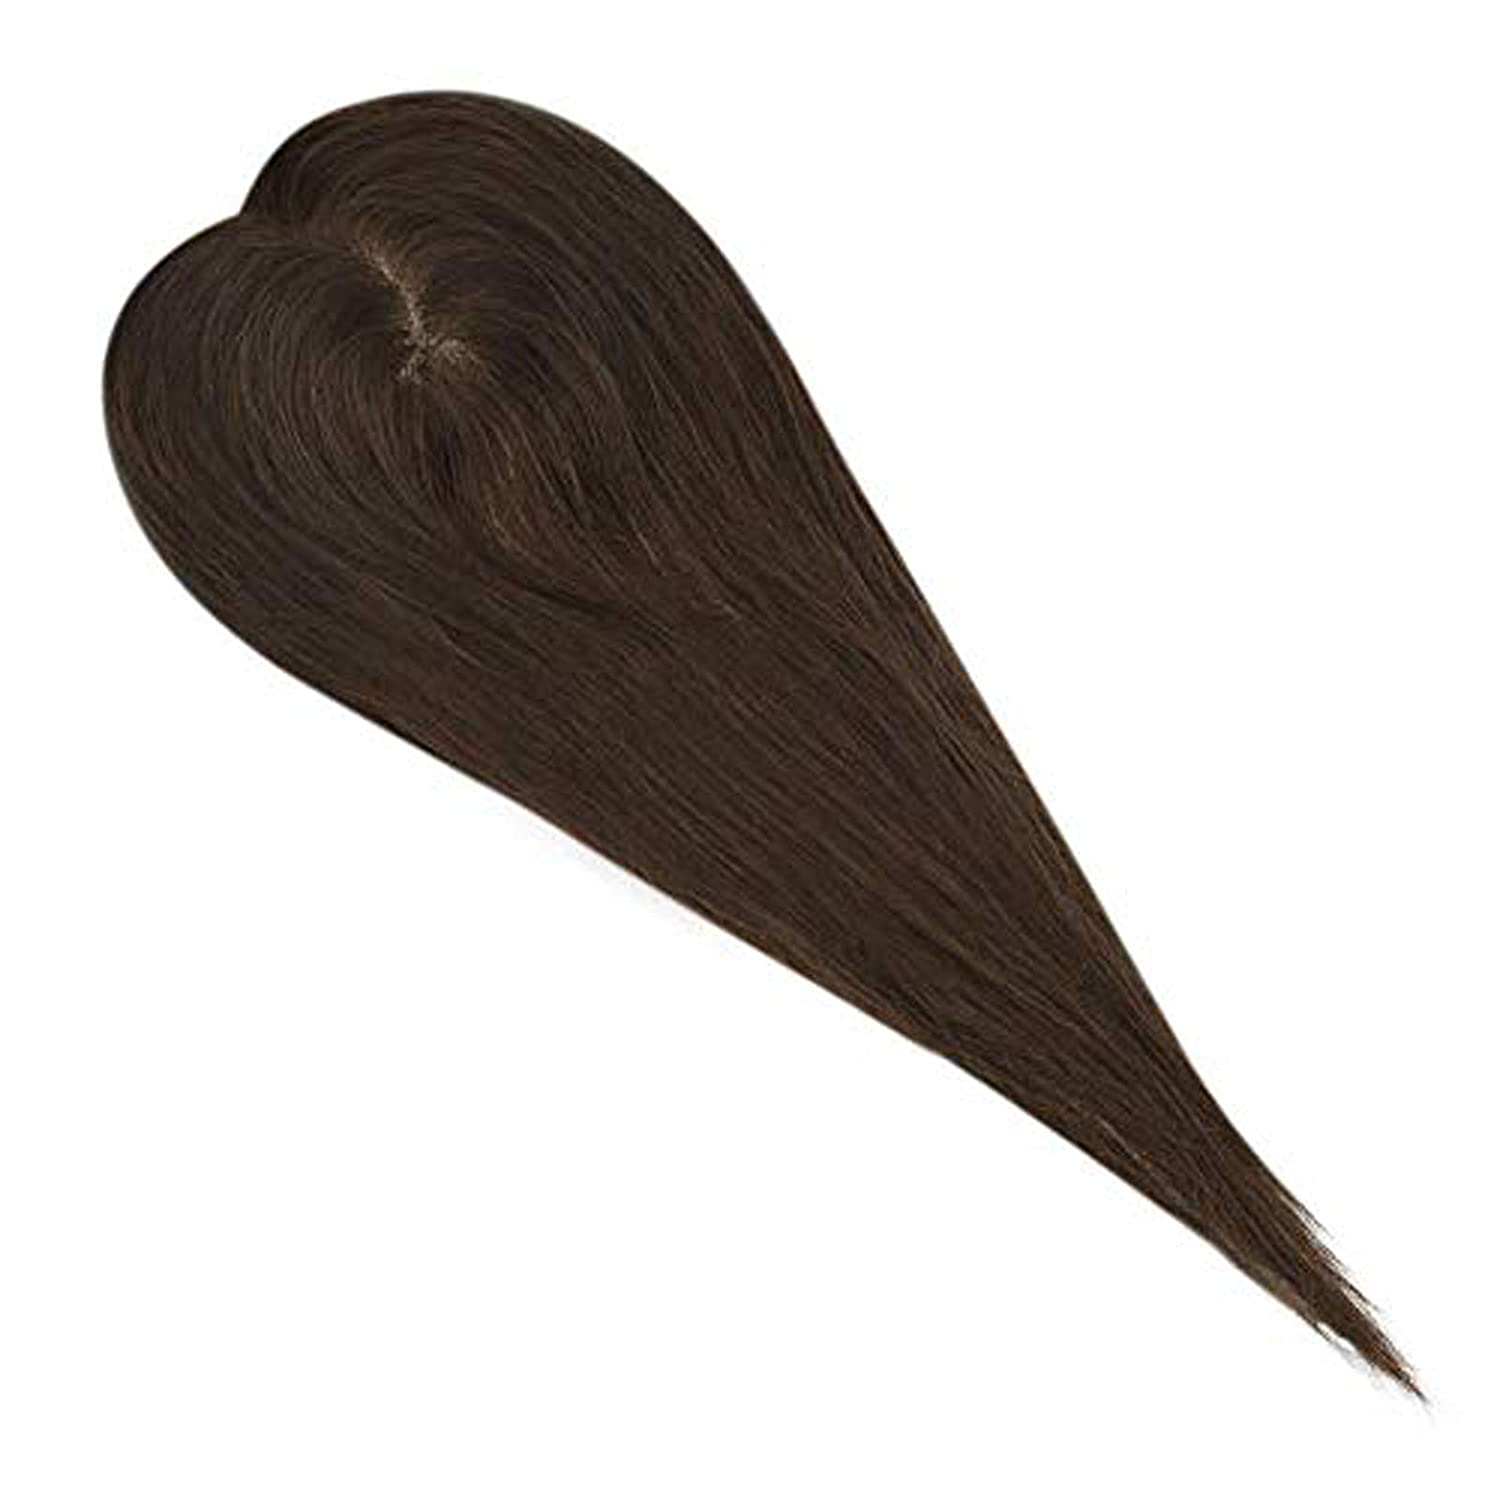 Toppers Hand-made Hairpiece For Women Color Medium Brown 6.5*2.25